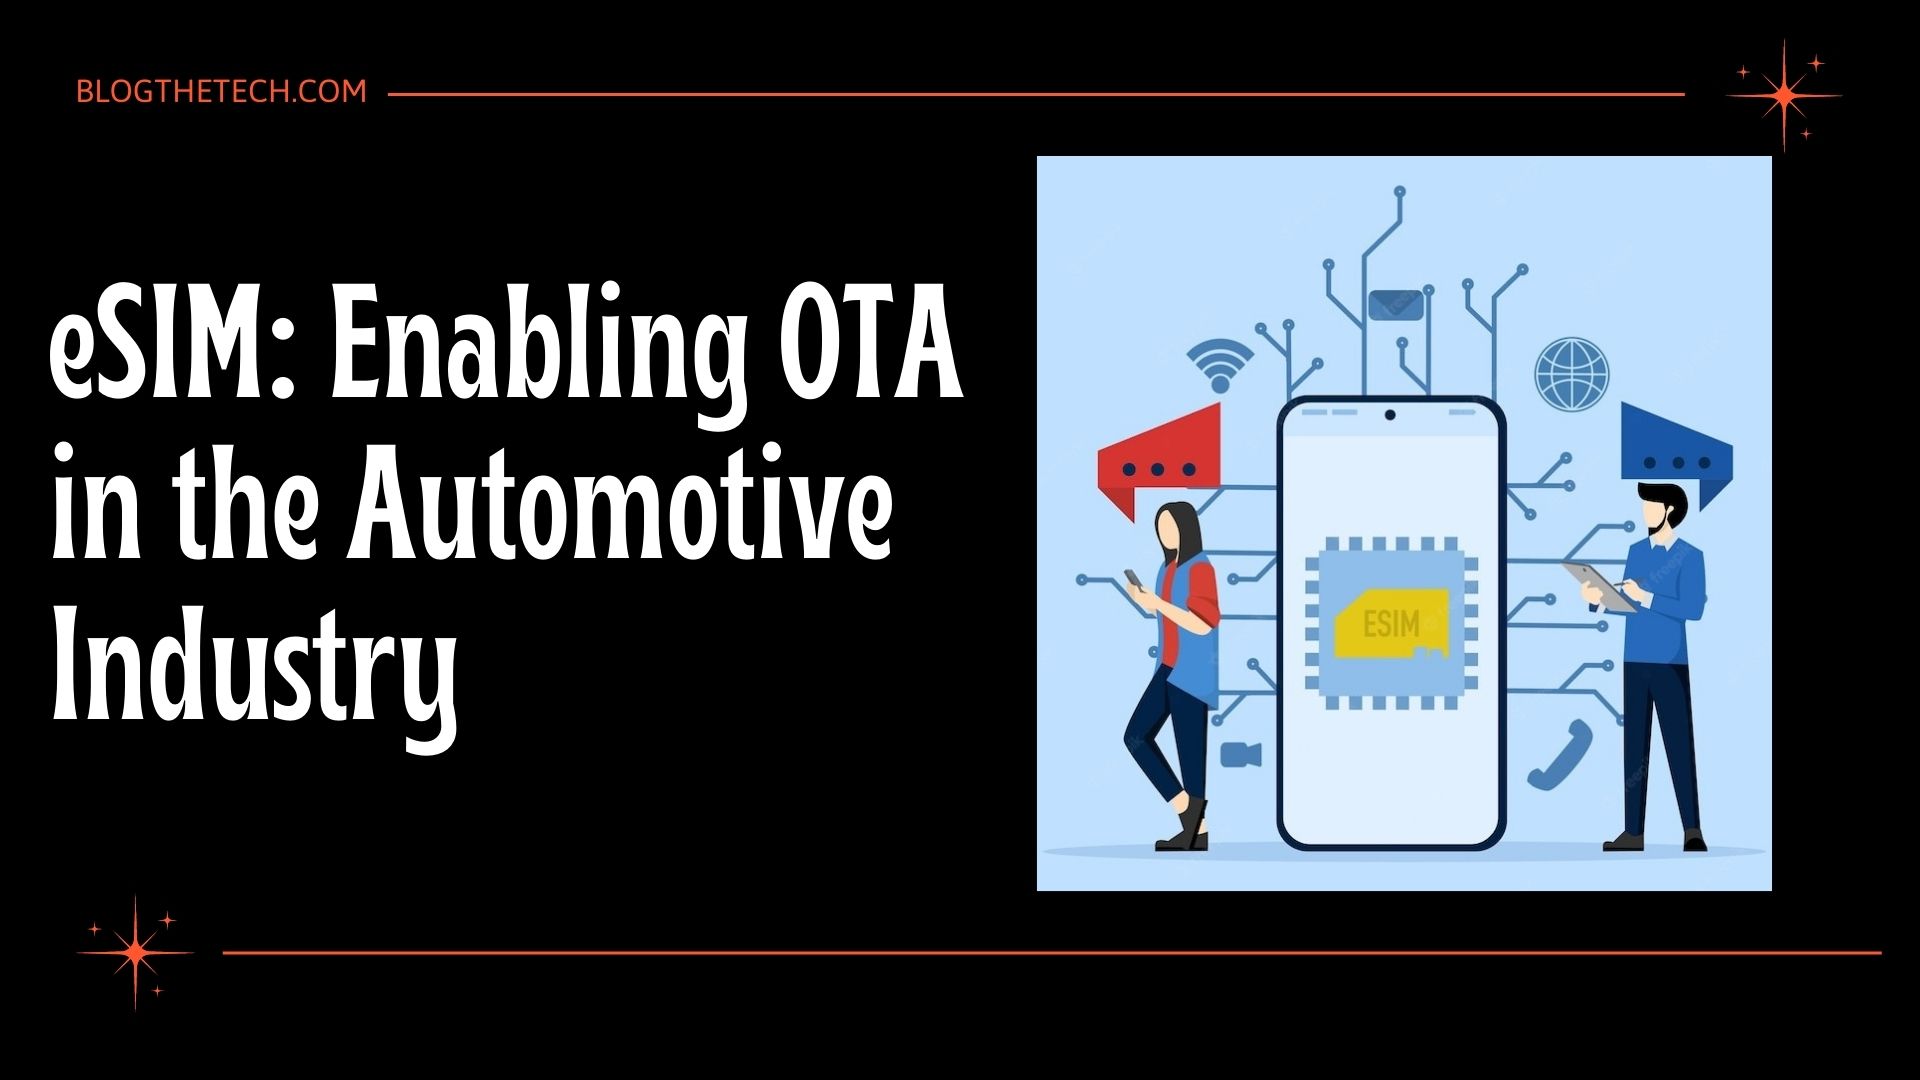 How eSIM Orchestration Enables OTA in the Automotive Industry